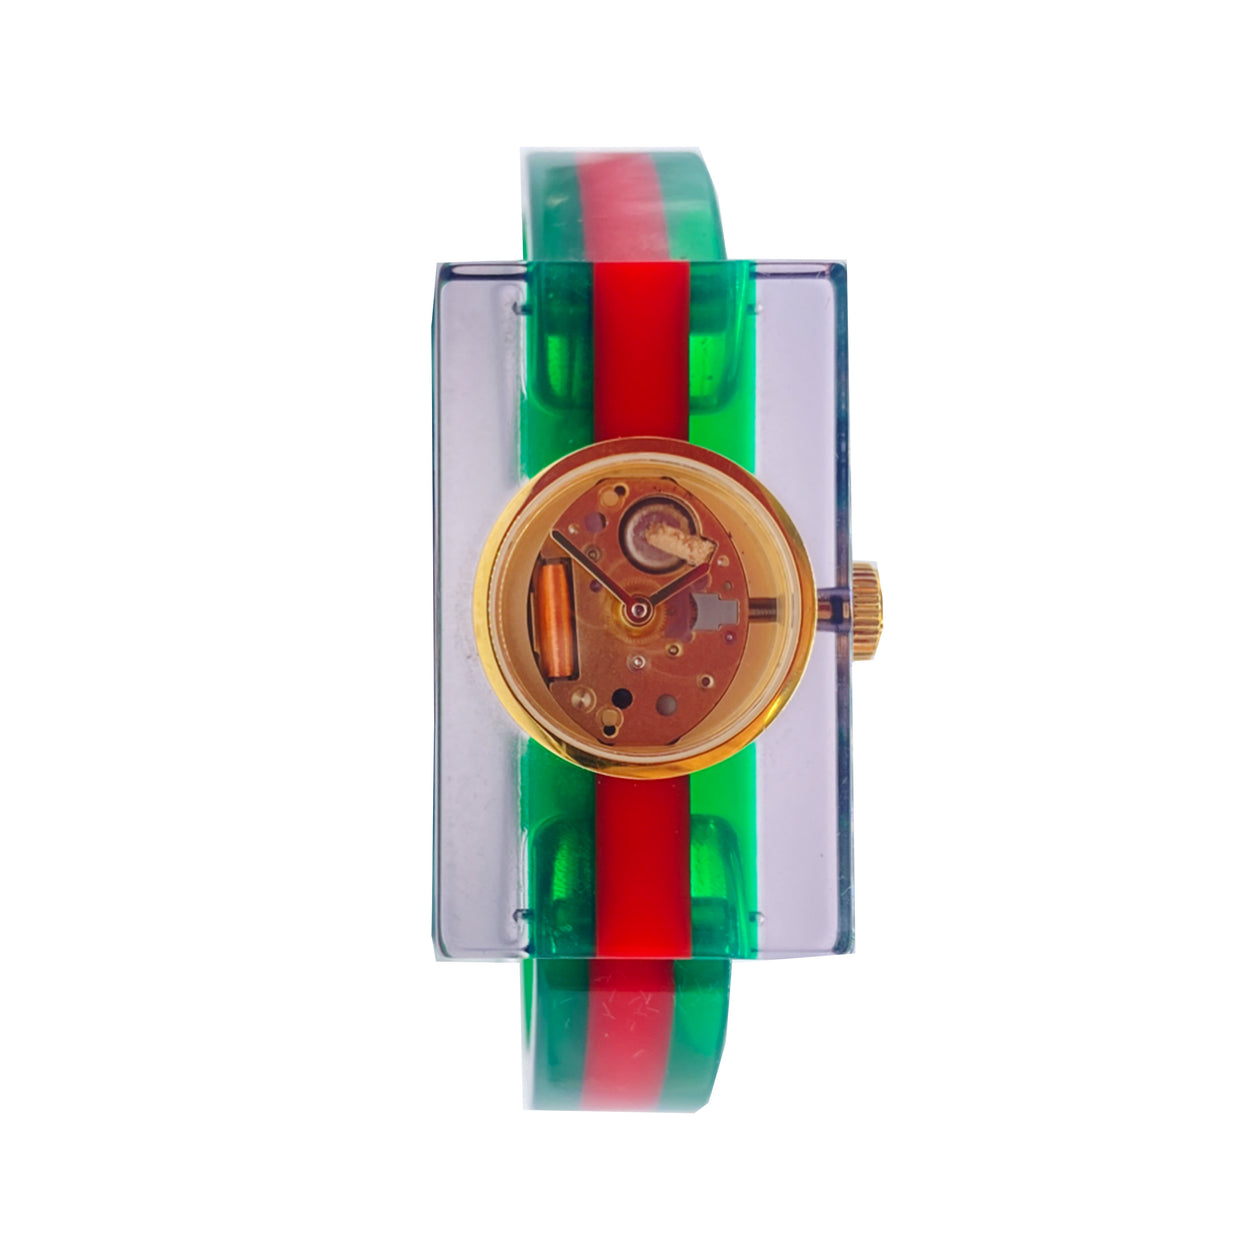 Gucci Men's Authenticated Watch